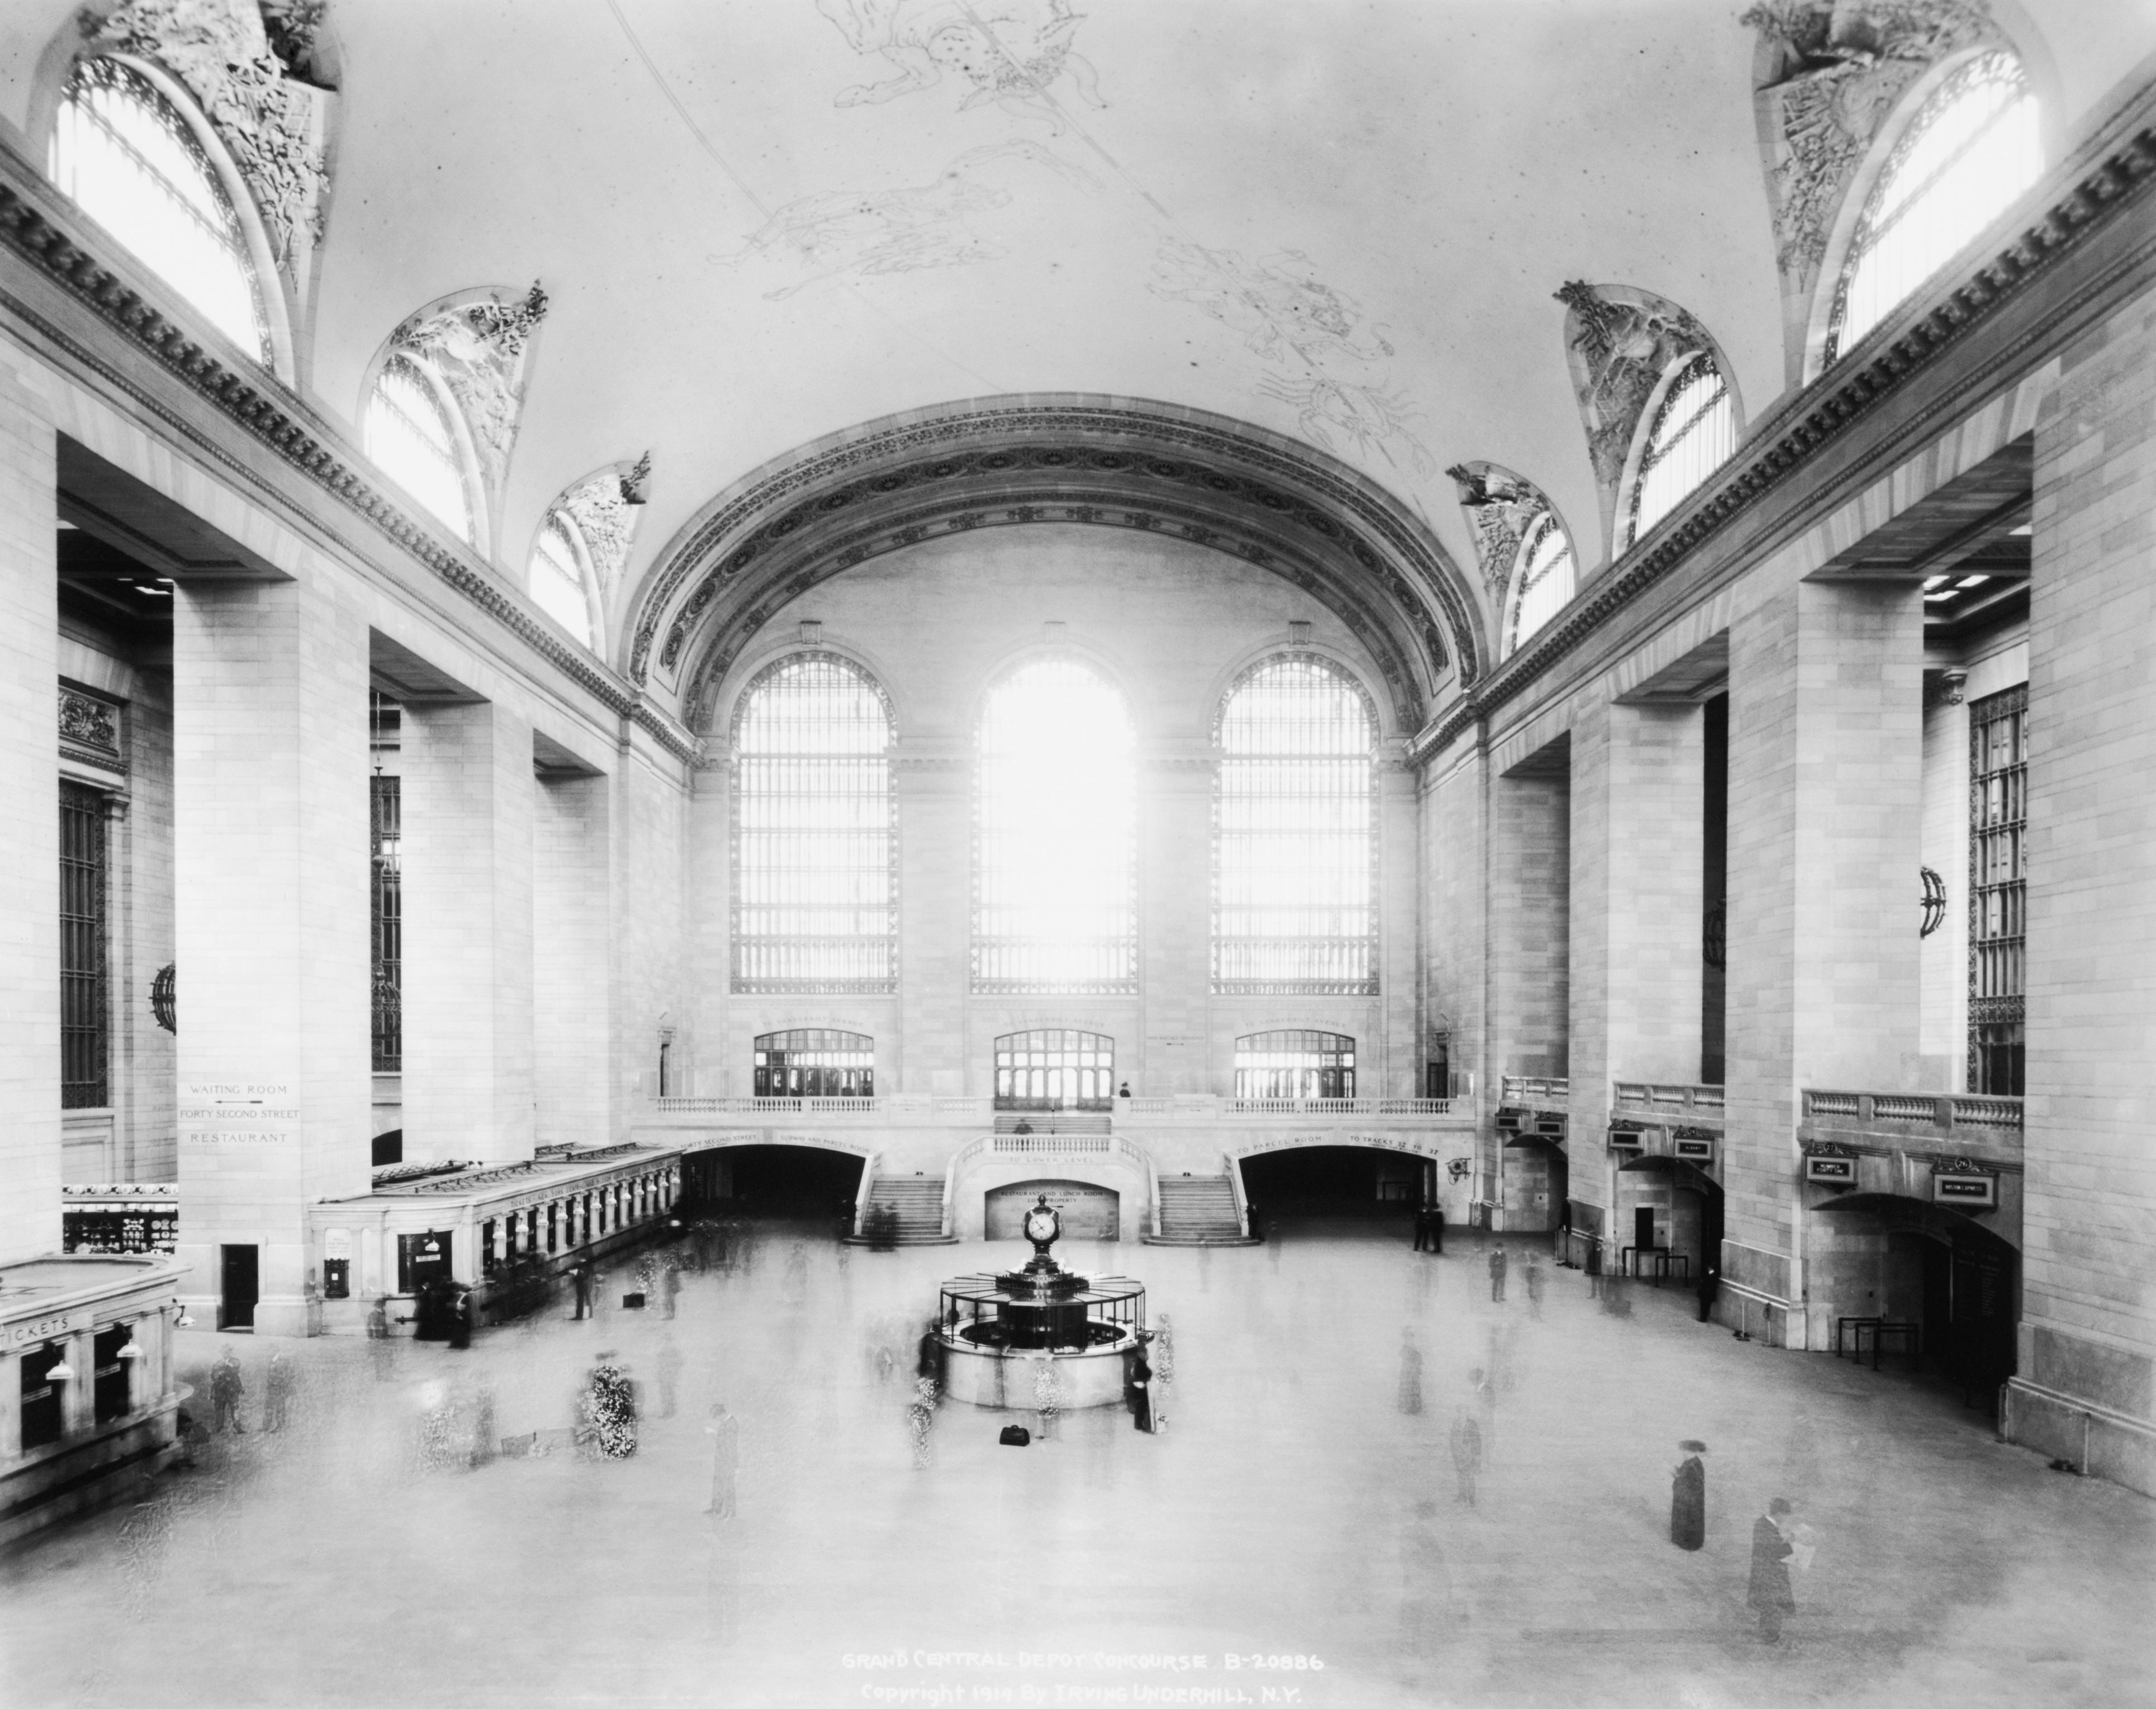 Slide 18 of 29: Interior of Grand Central train station, showing a nearly empty concourse area.